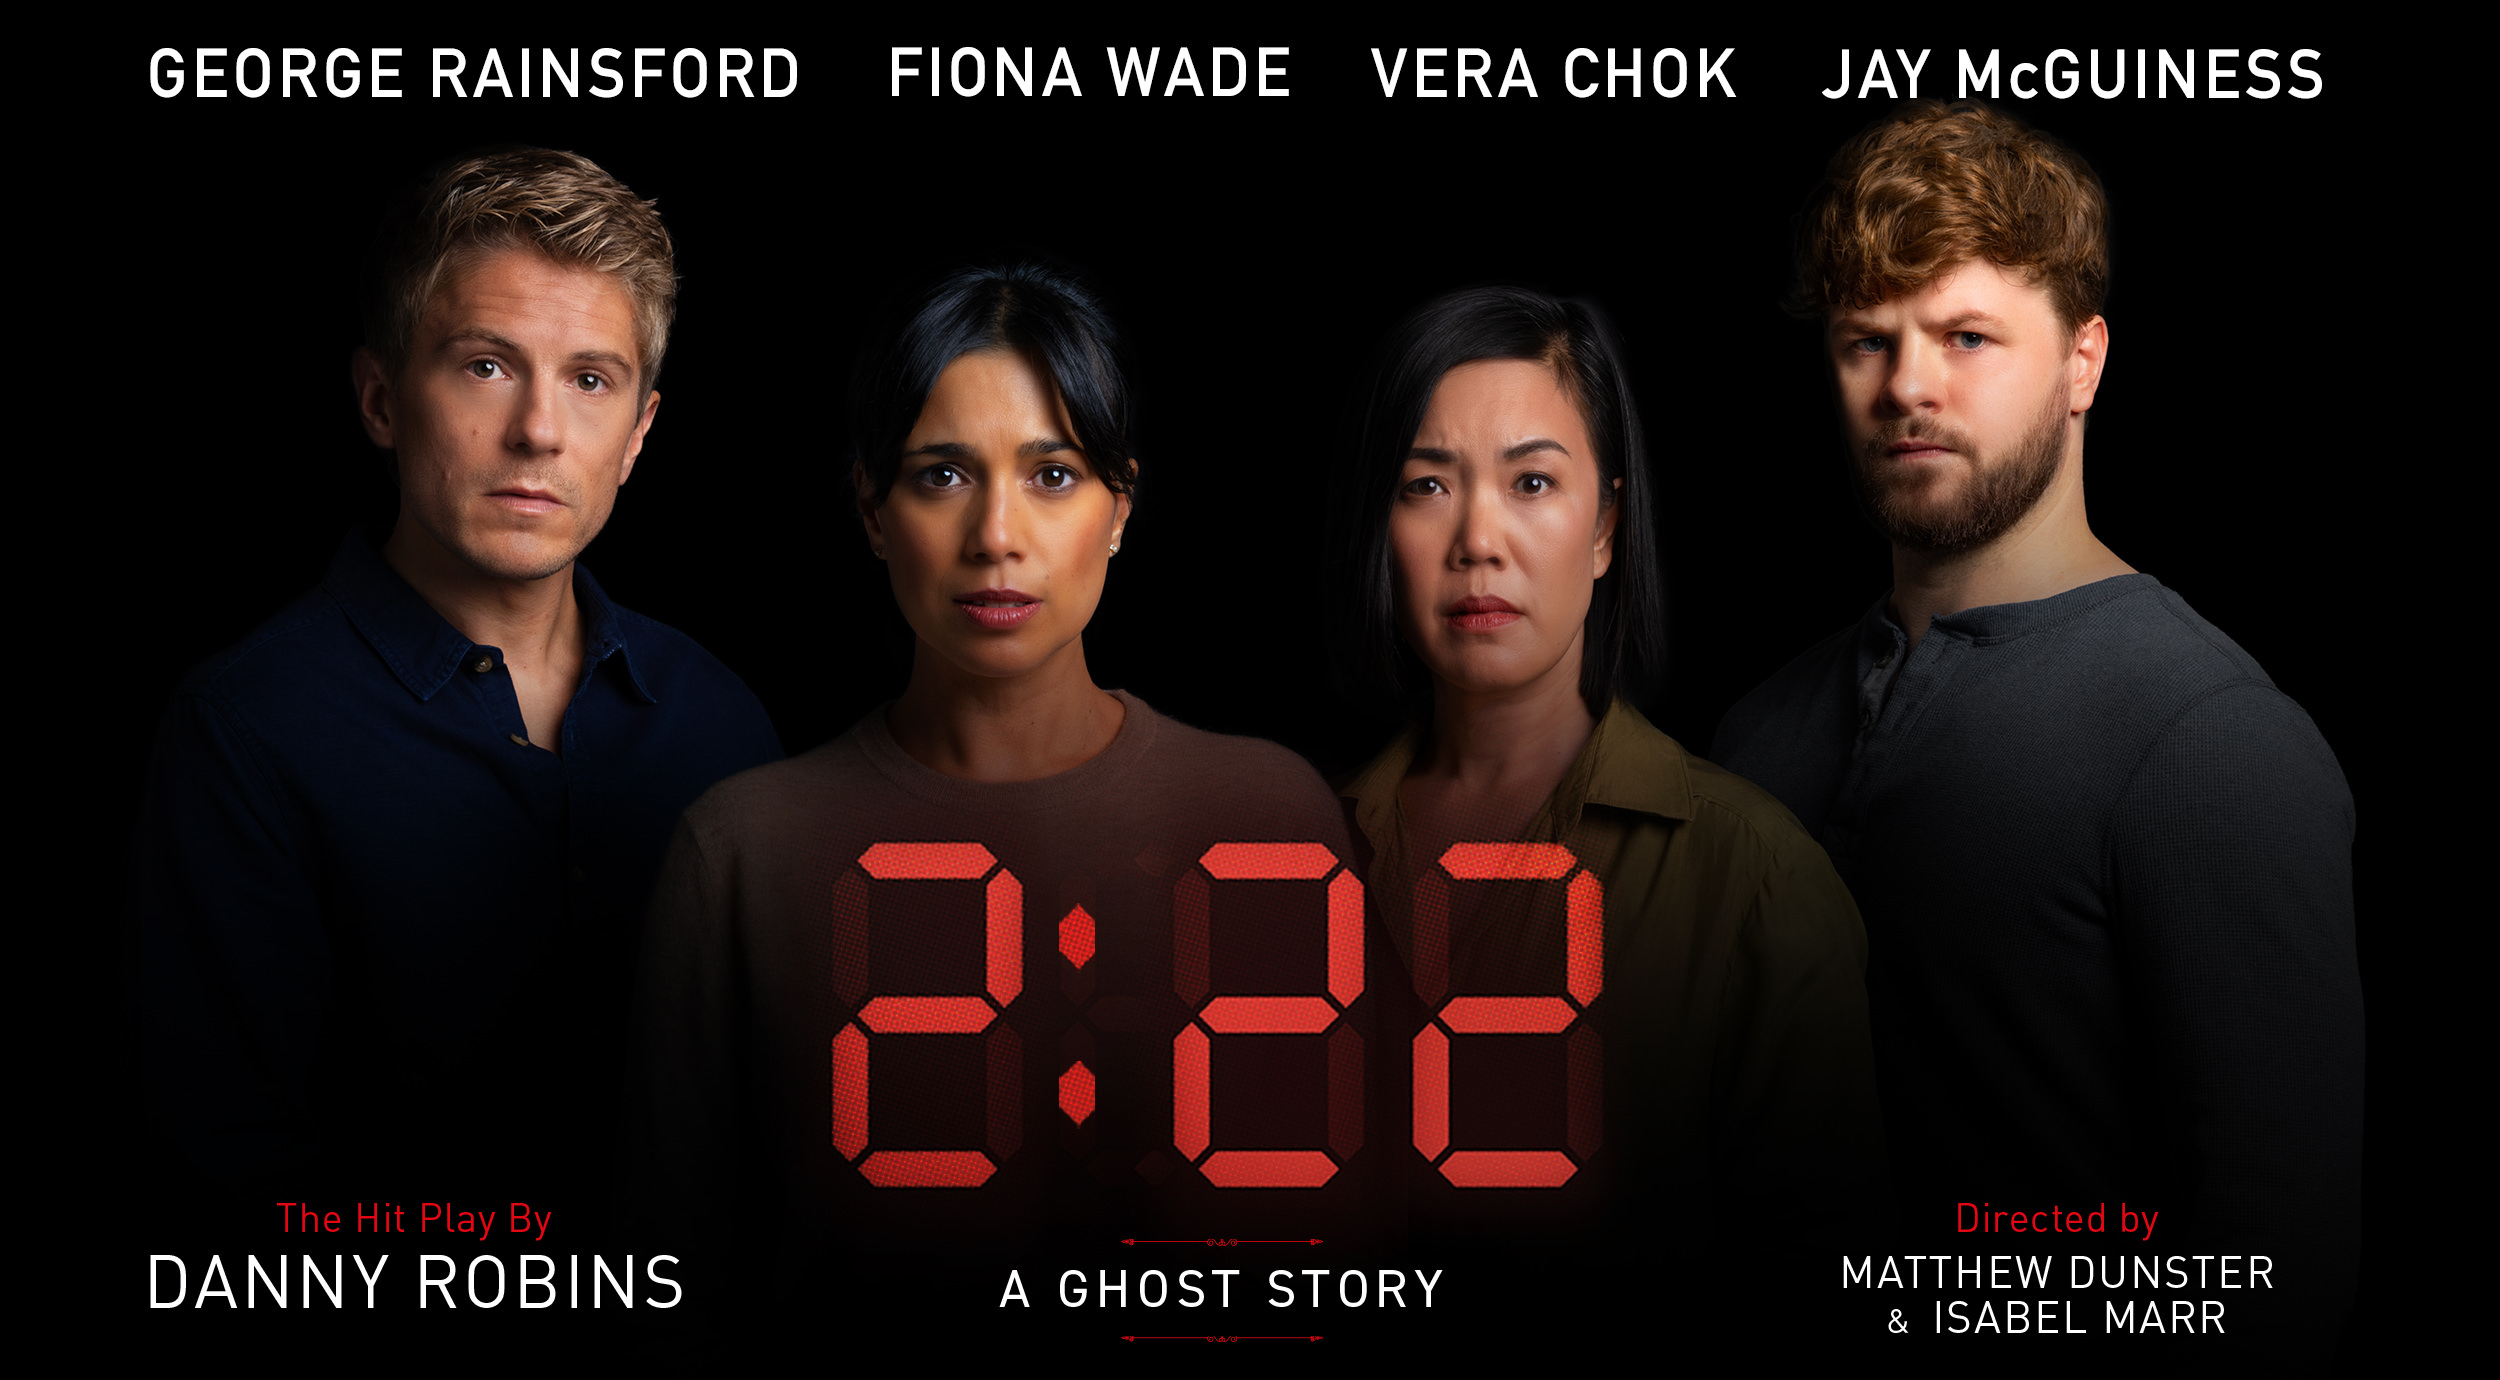 Promotional artwork for 2:22 A Ghost Story. Mid shots of the cast on a black background with the title written in digital alarm clock font. The cast from left to right are George Rainsford, Fiona Wade, Vera Chok and Jay McGuiness.